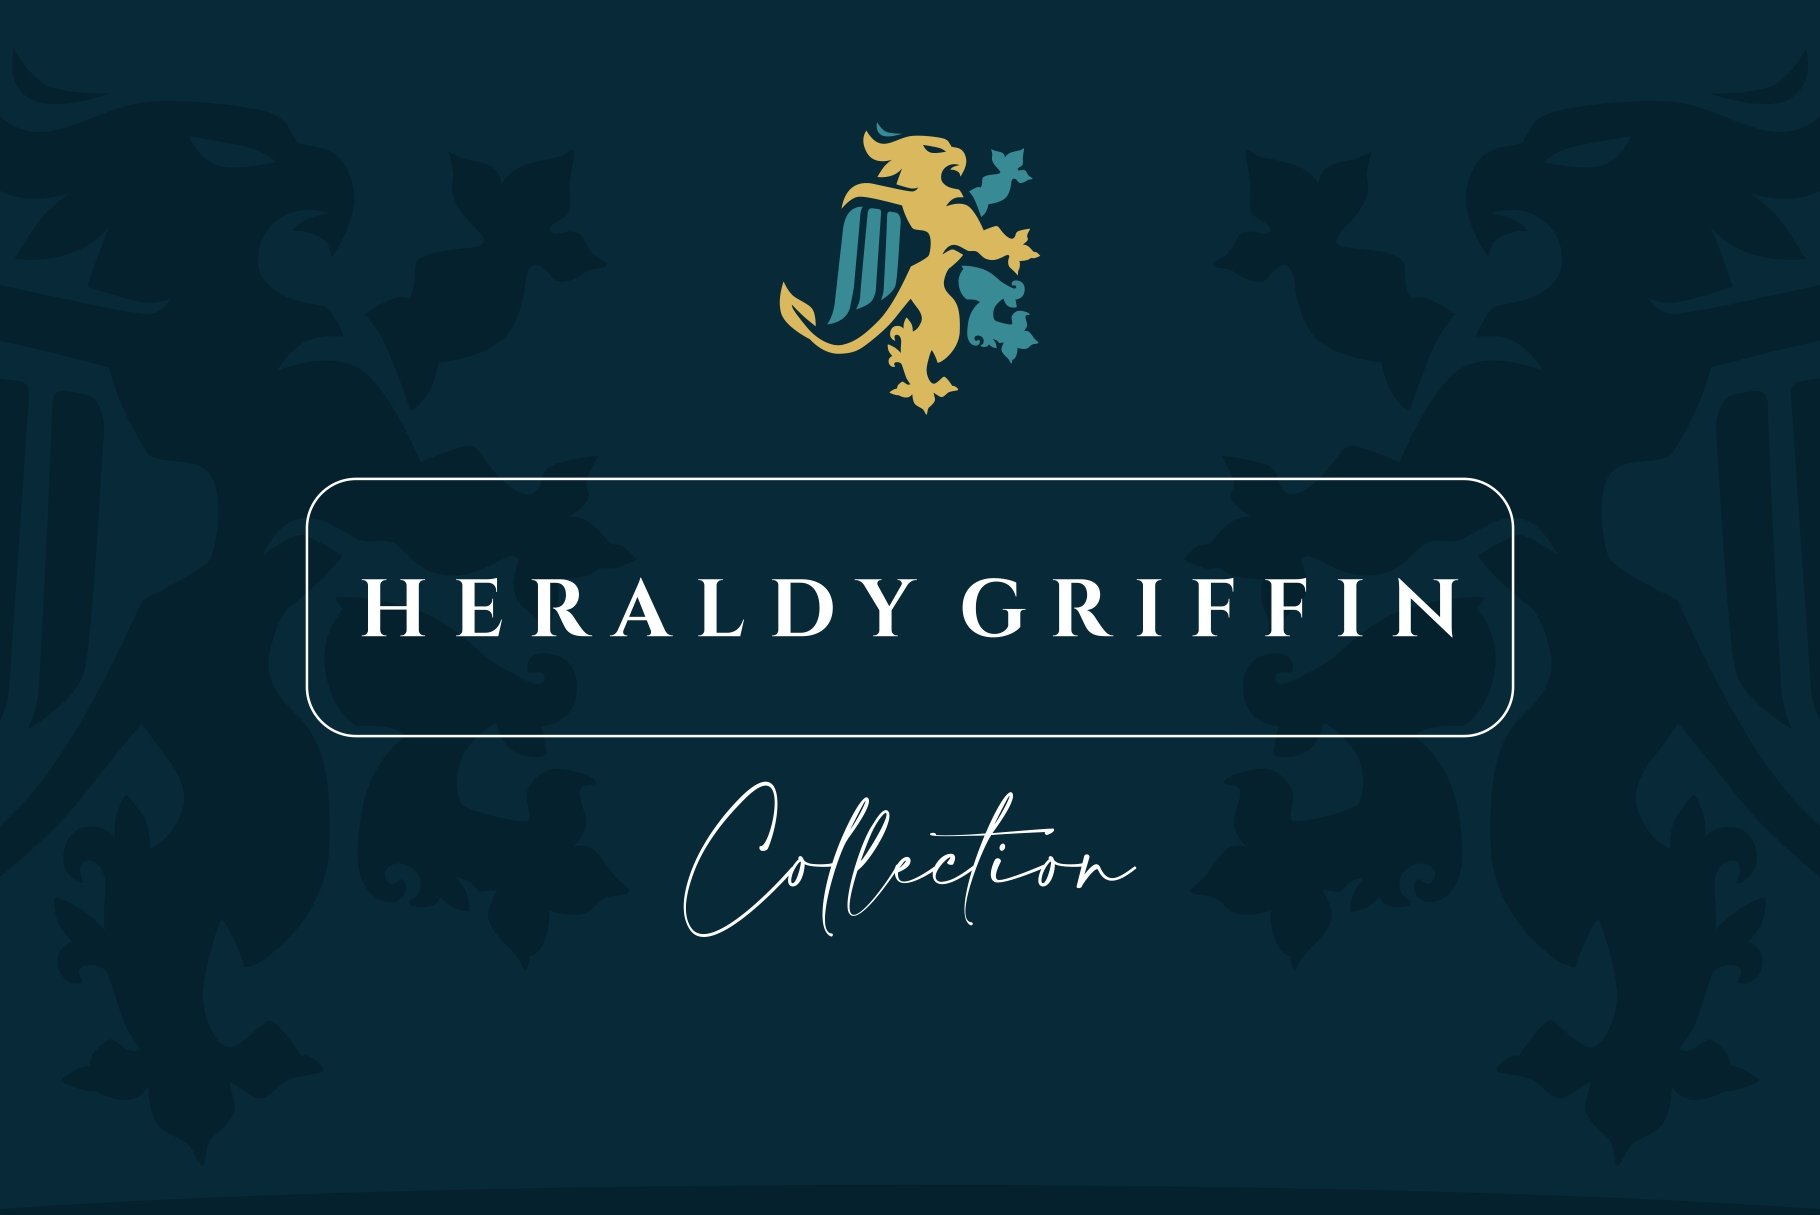 heraldry griffin logo collection1